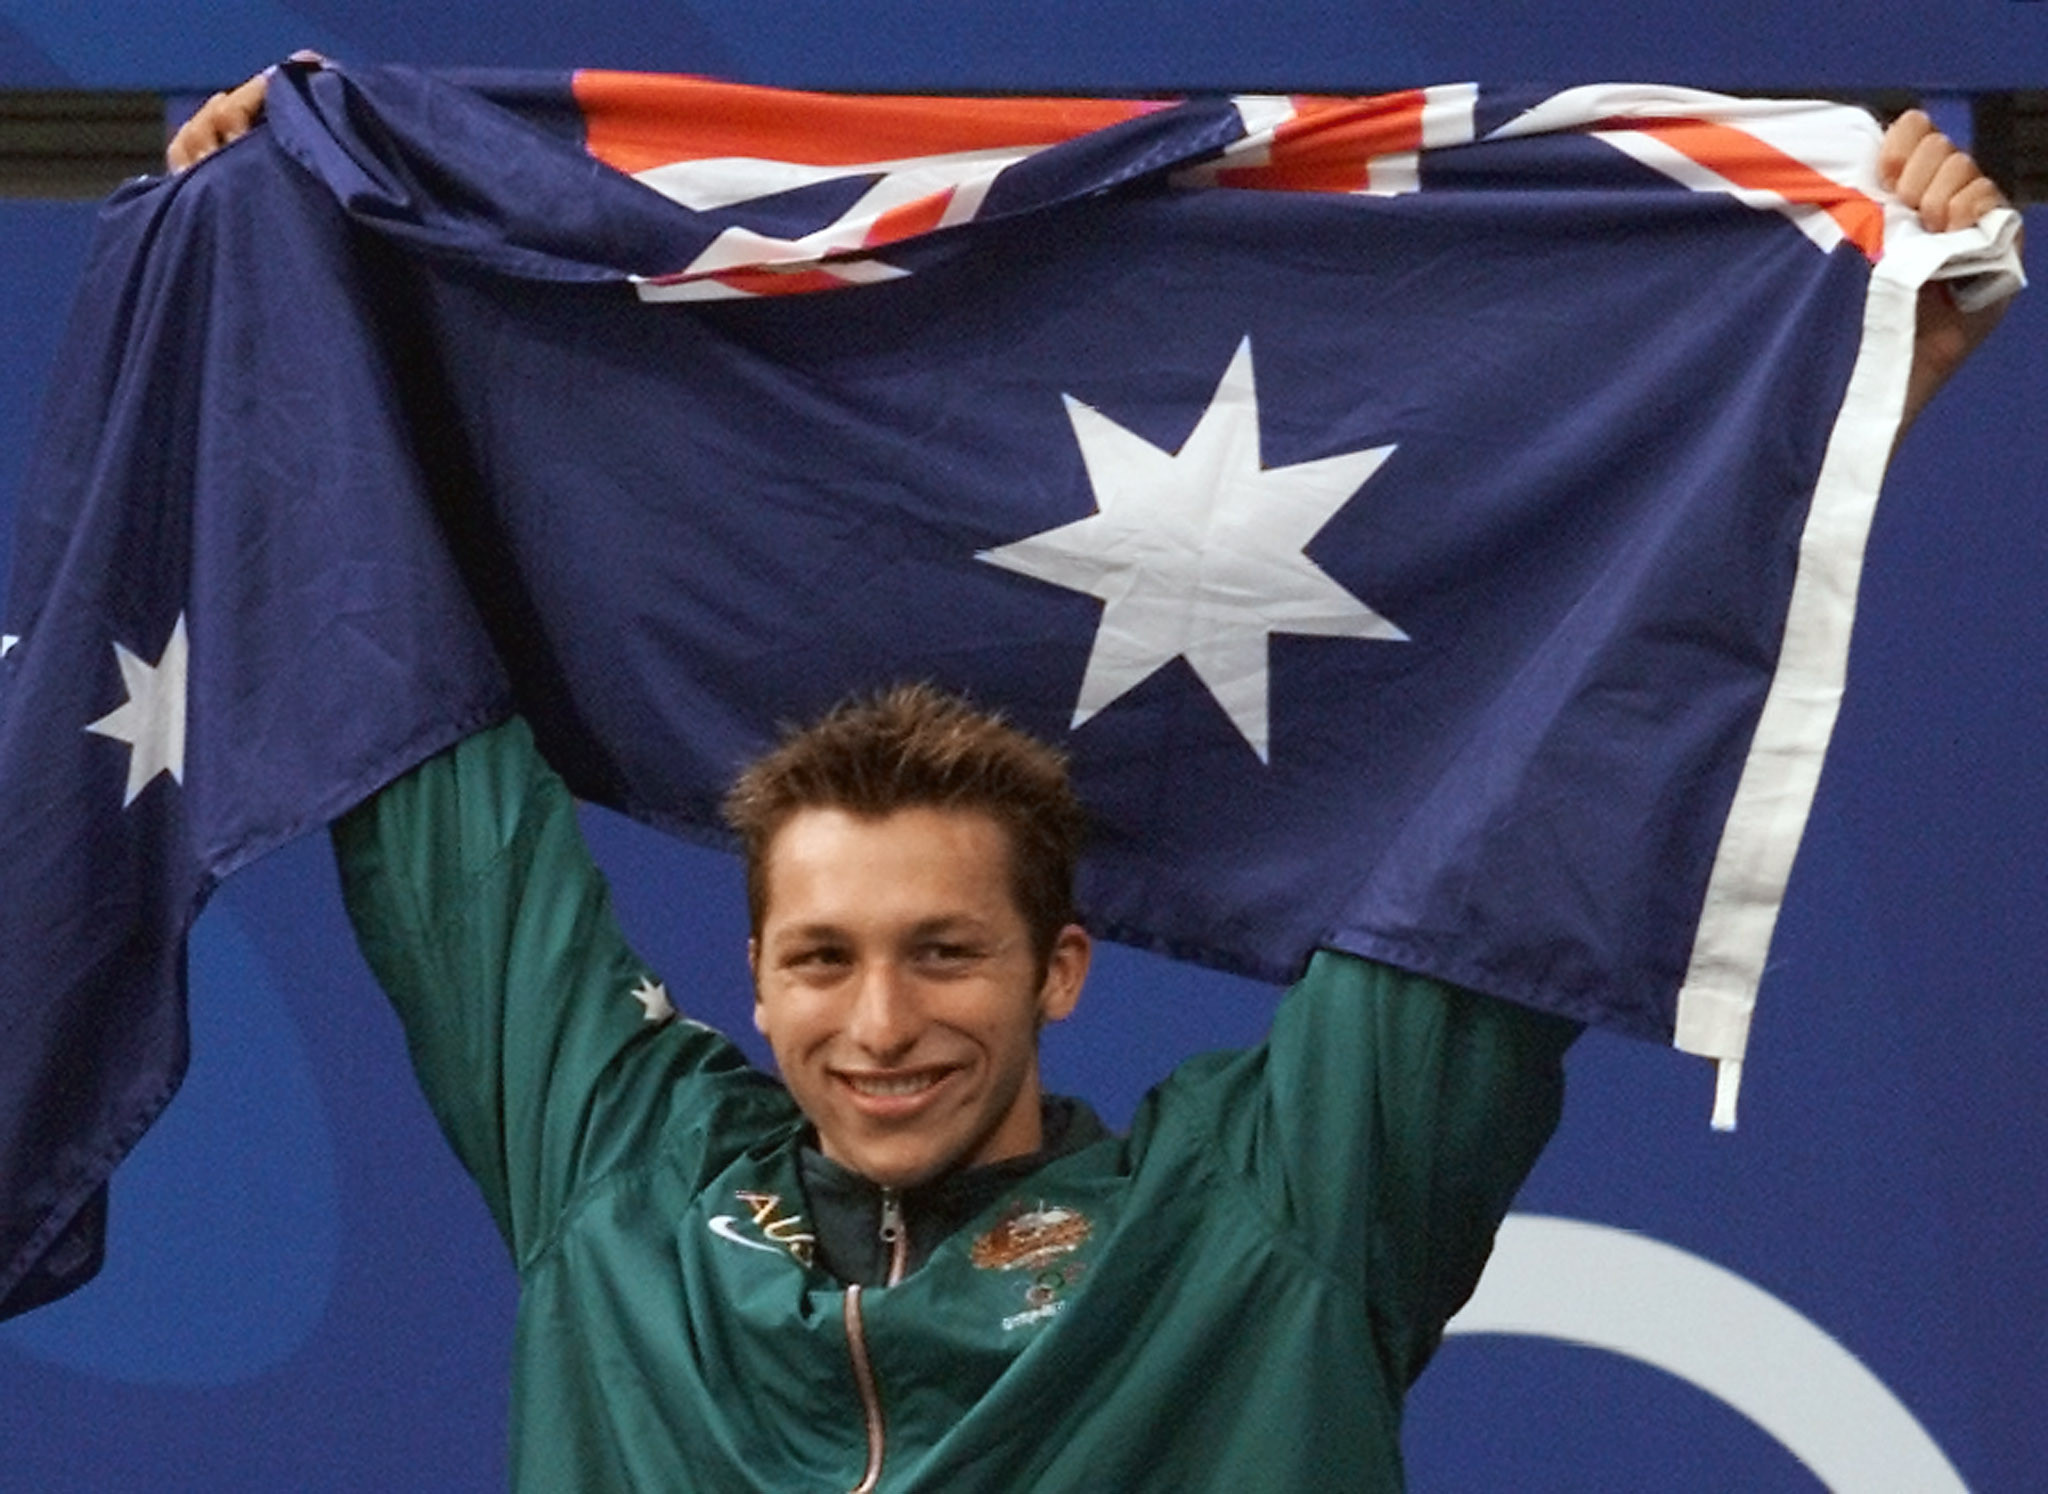 Ian Thorpe's three gold medals in the pool at the Sydney 2000 Olympics made him a hero throughout Australia ©Getty Images